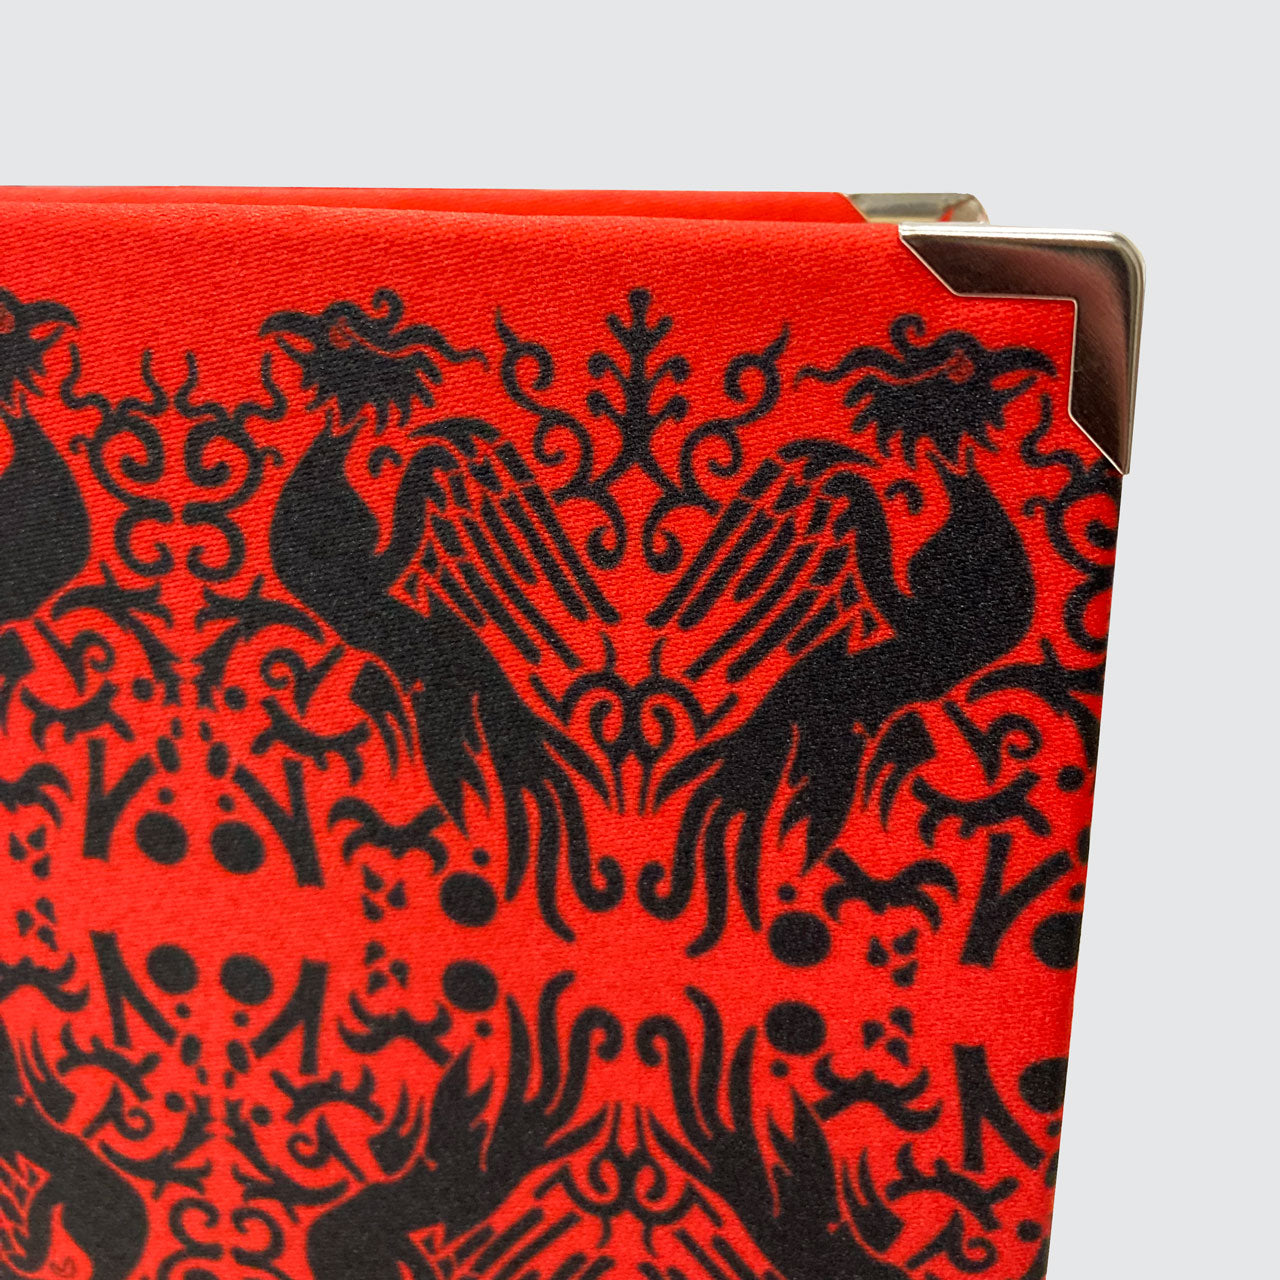 Journal - Hardback Notebook With Blank Pages - Red Phoenix Pattern